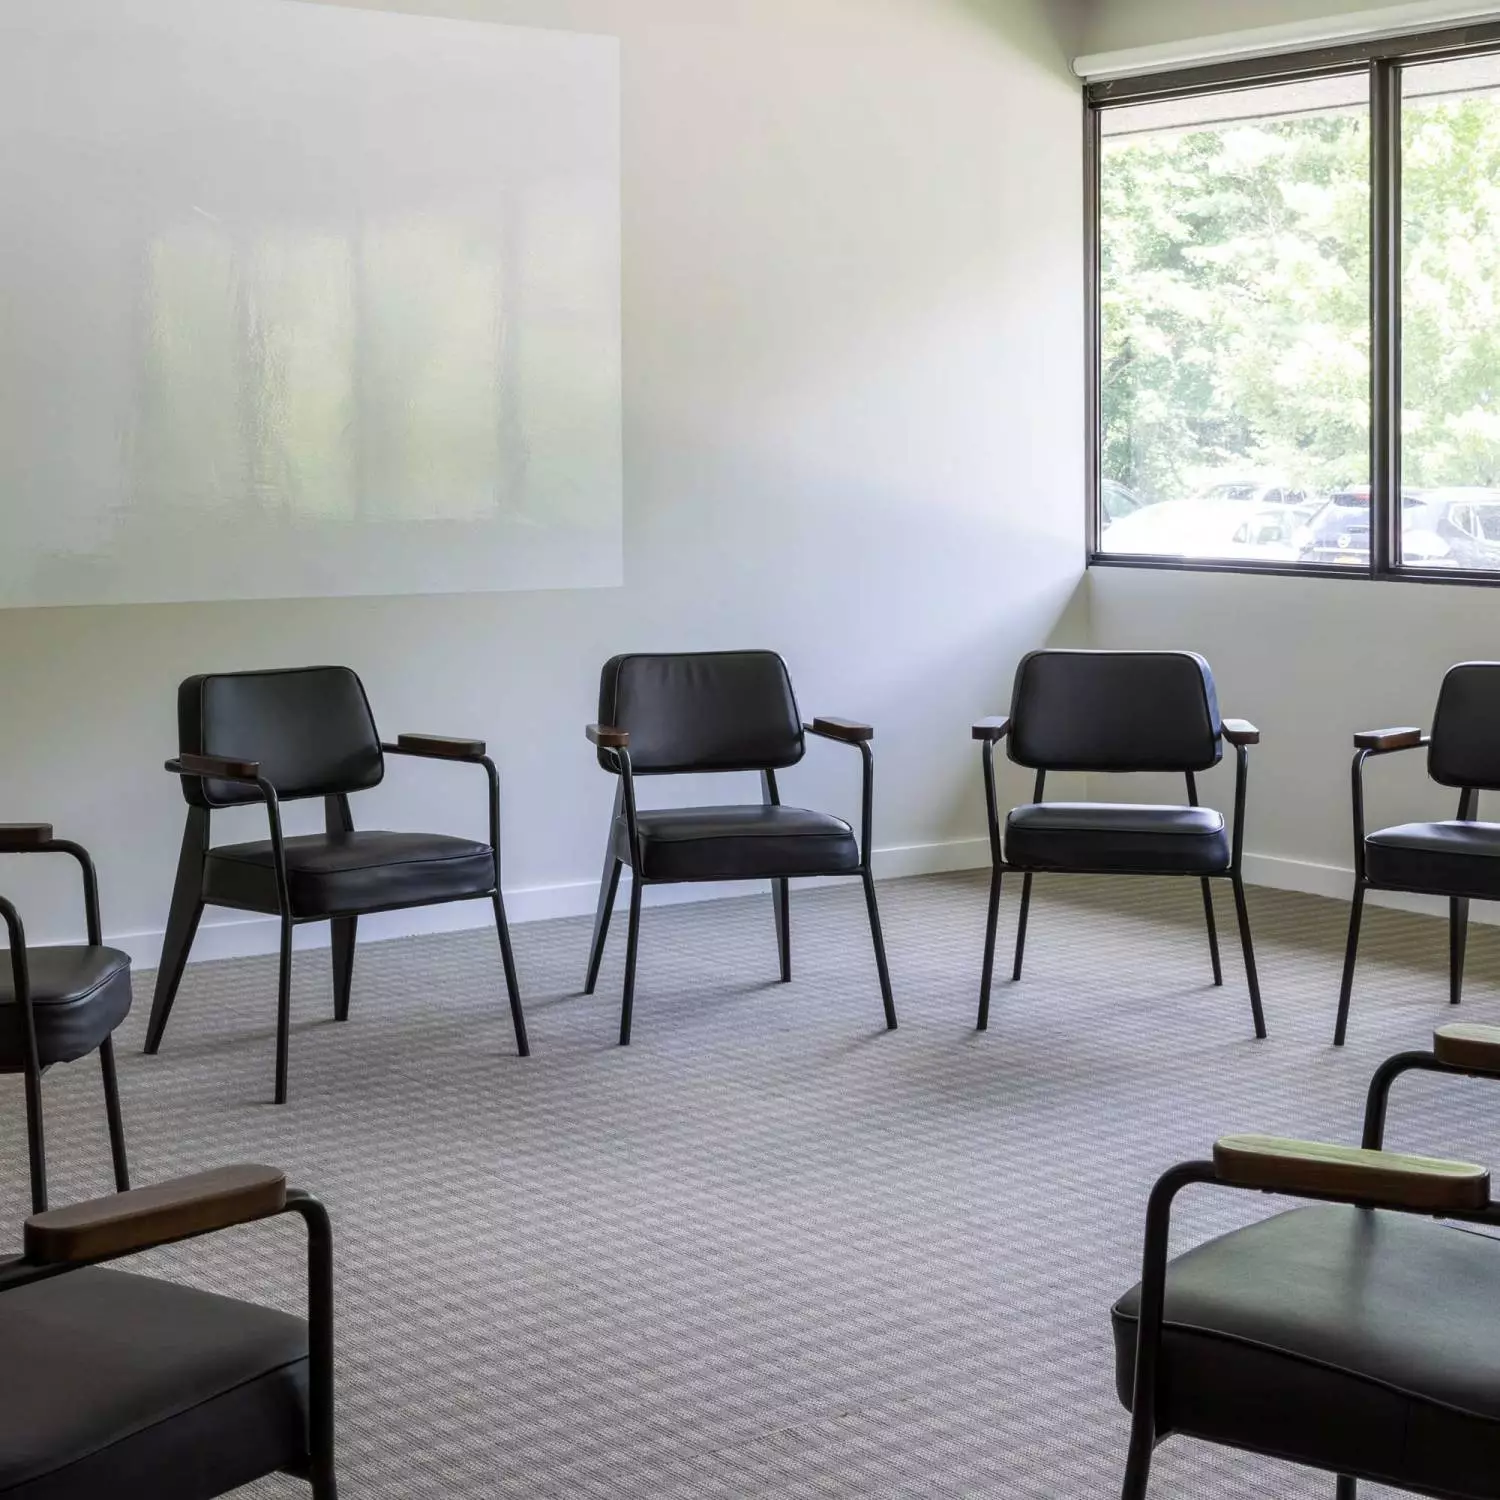 Group Counseling Room at Mountainside Addiction Treatment Center in Chappaqua, NY